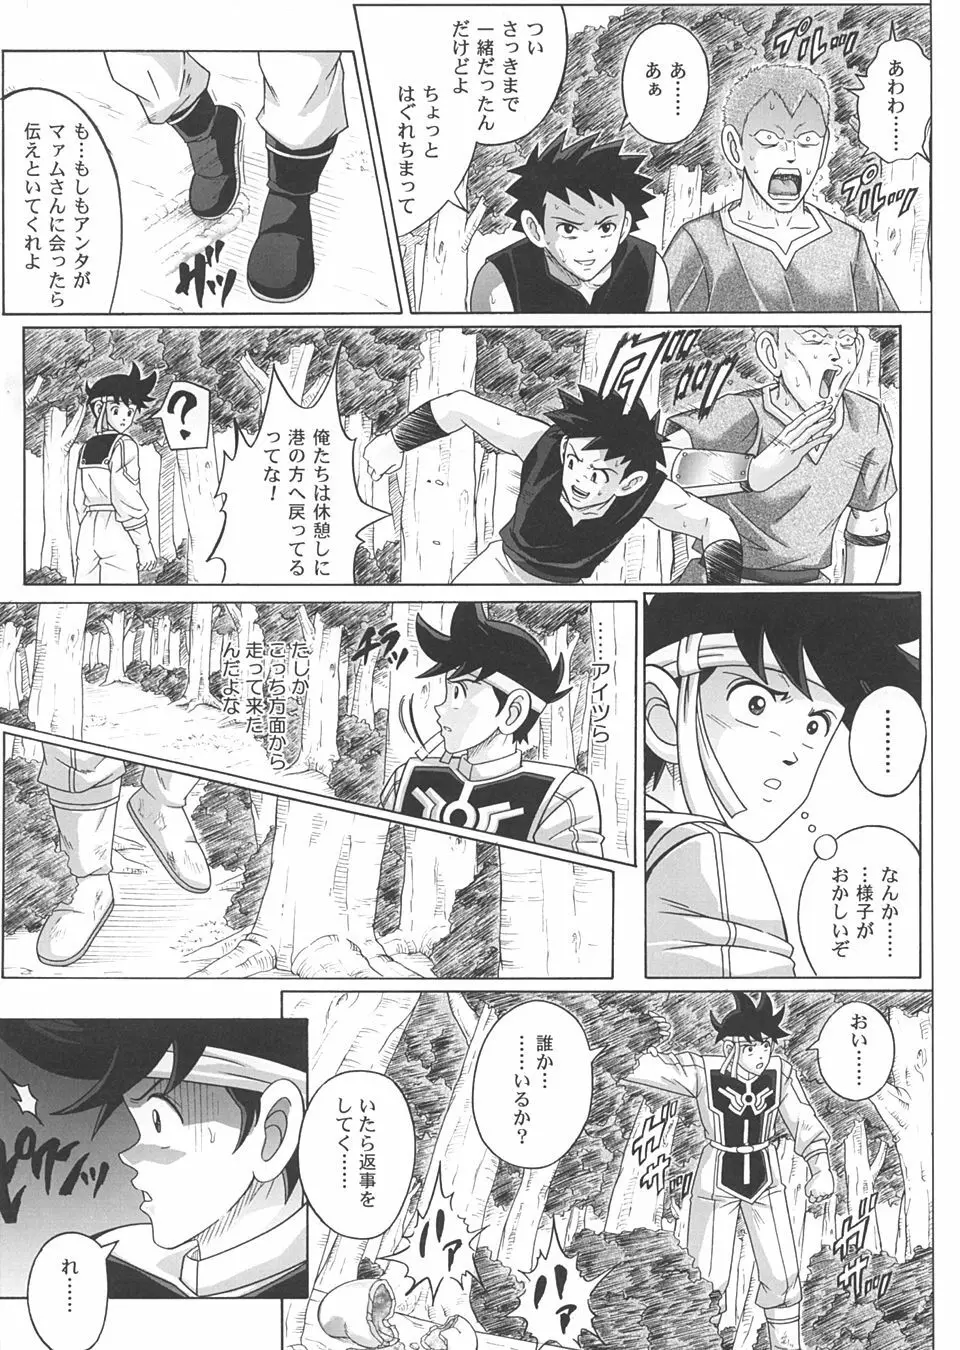 Sinclair 2 & Extra -シンクレア2- - page46